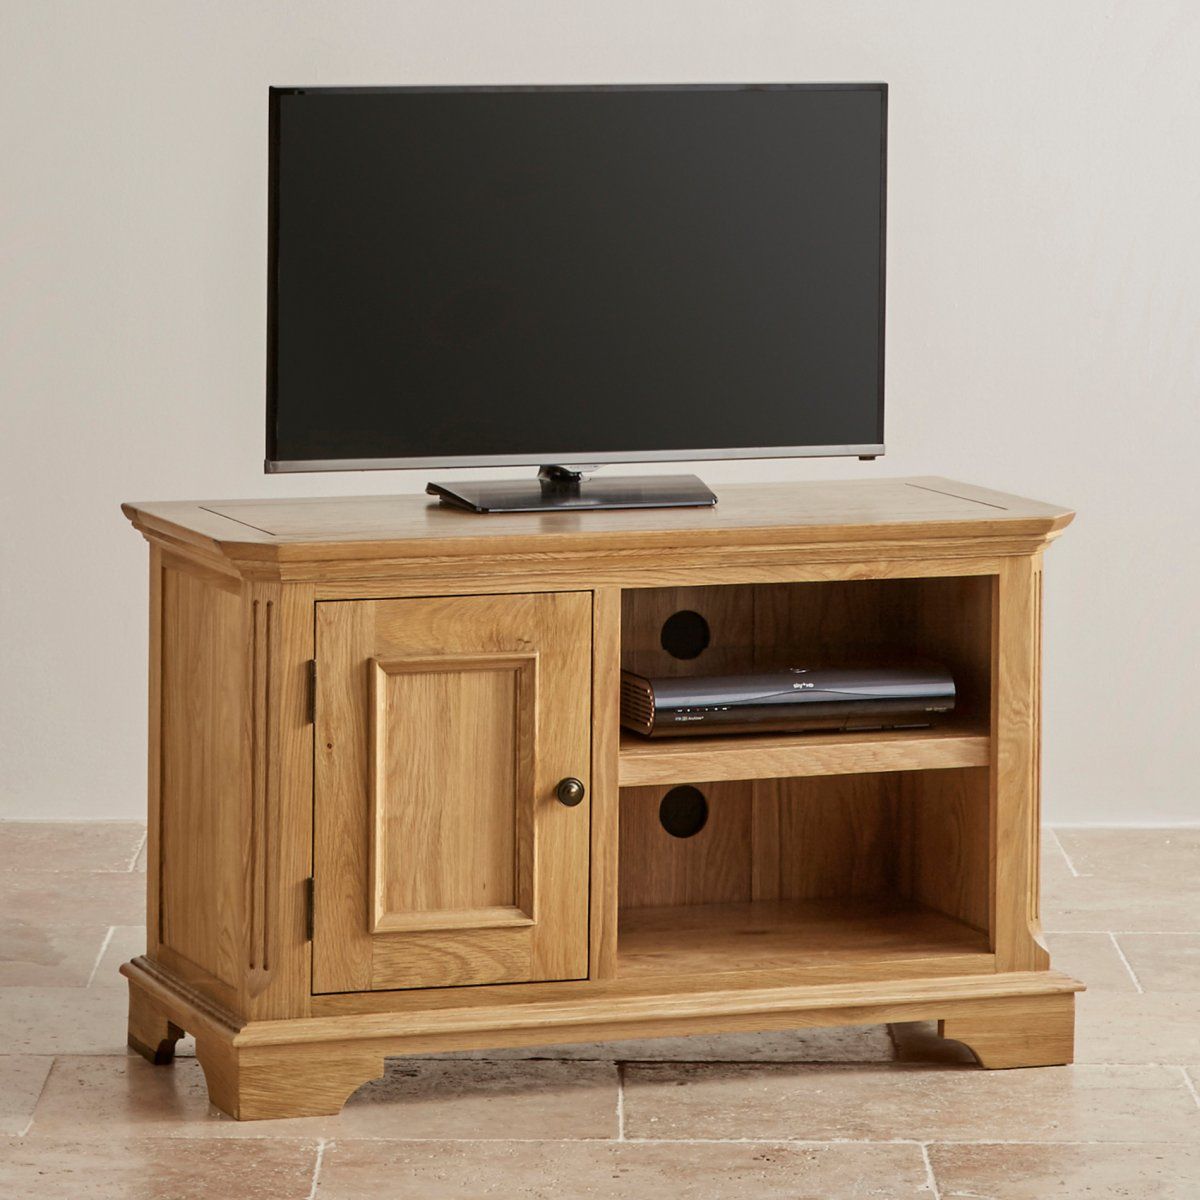 Edinburgh Small Tv Cabinet In Solid Oak | Oak Furniture Land Within Oak Tv Cabinet With Doors (View 5 of 15)